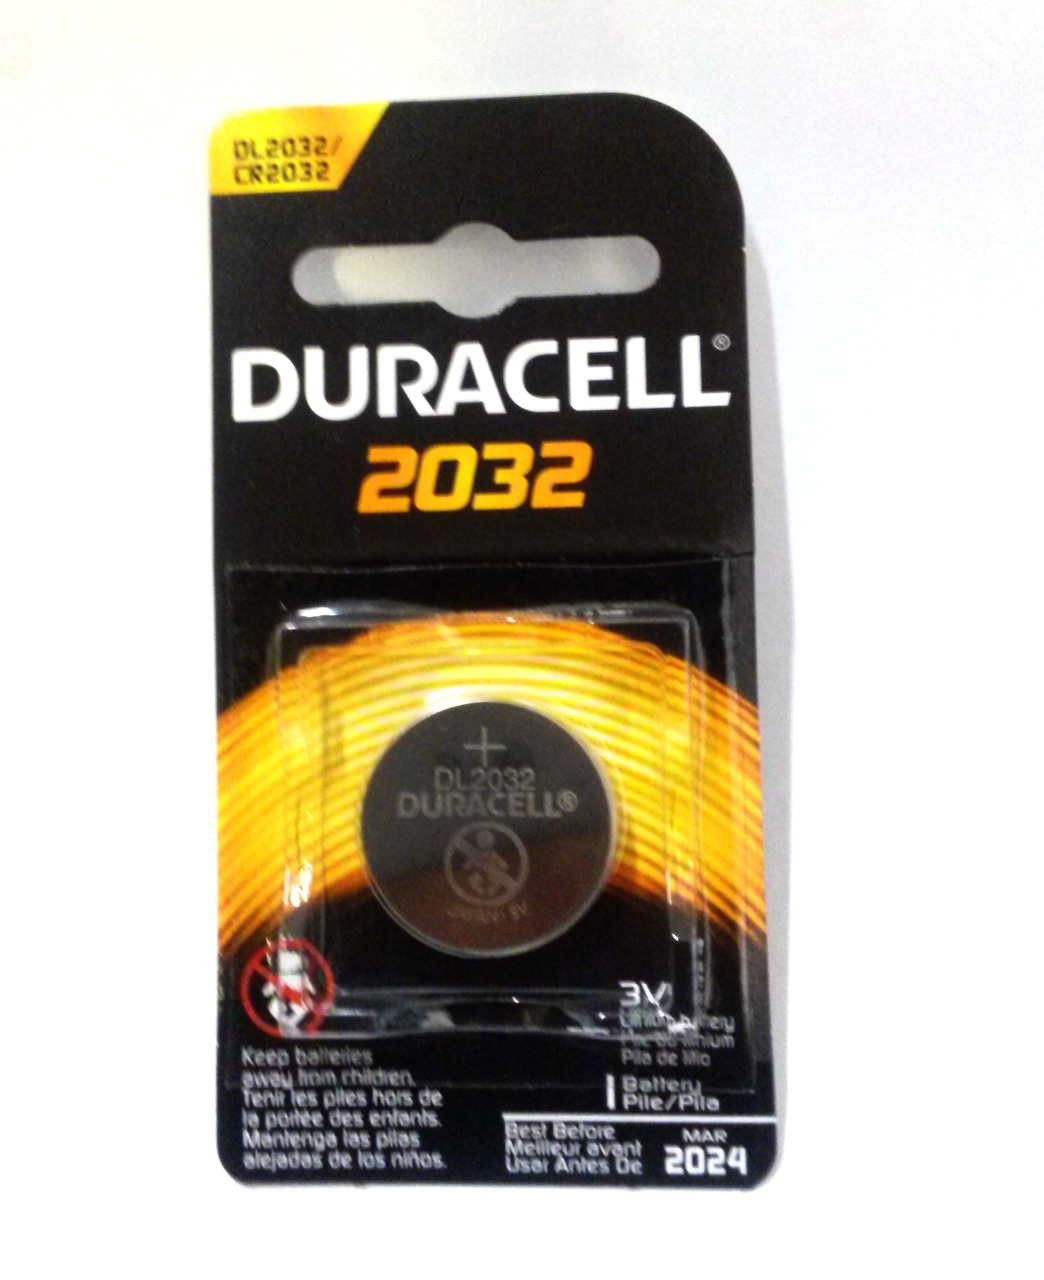 Duracell CR2032 Coin Battery - 1 Pack Retail Carded